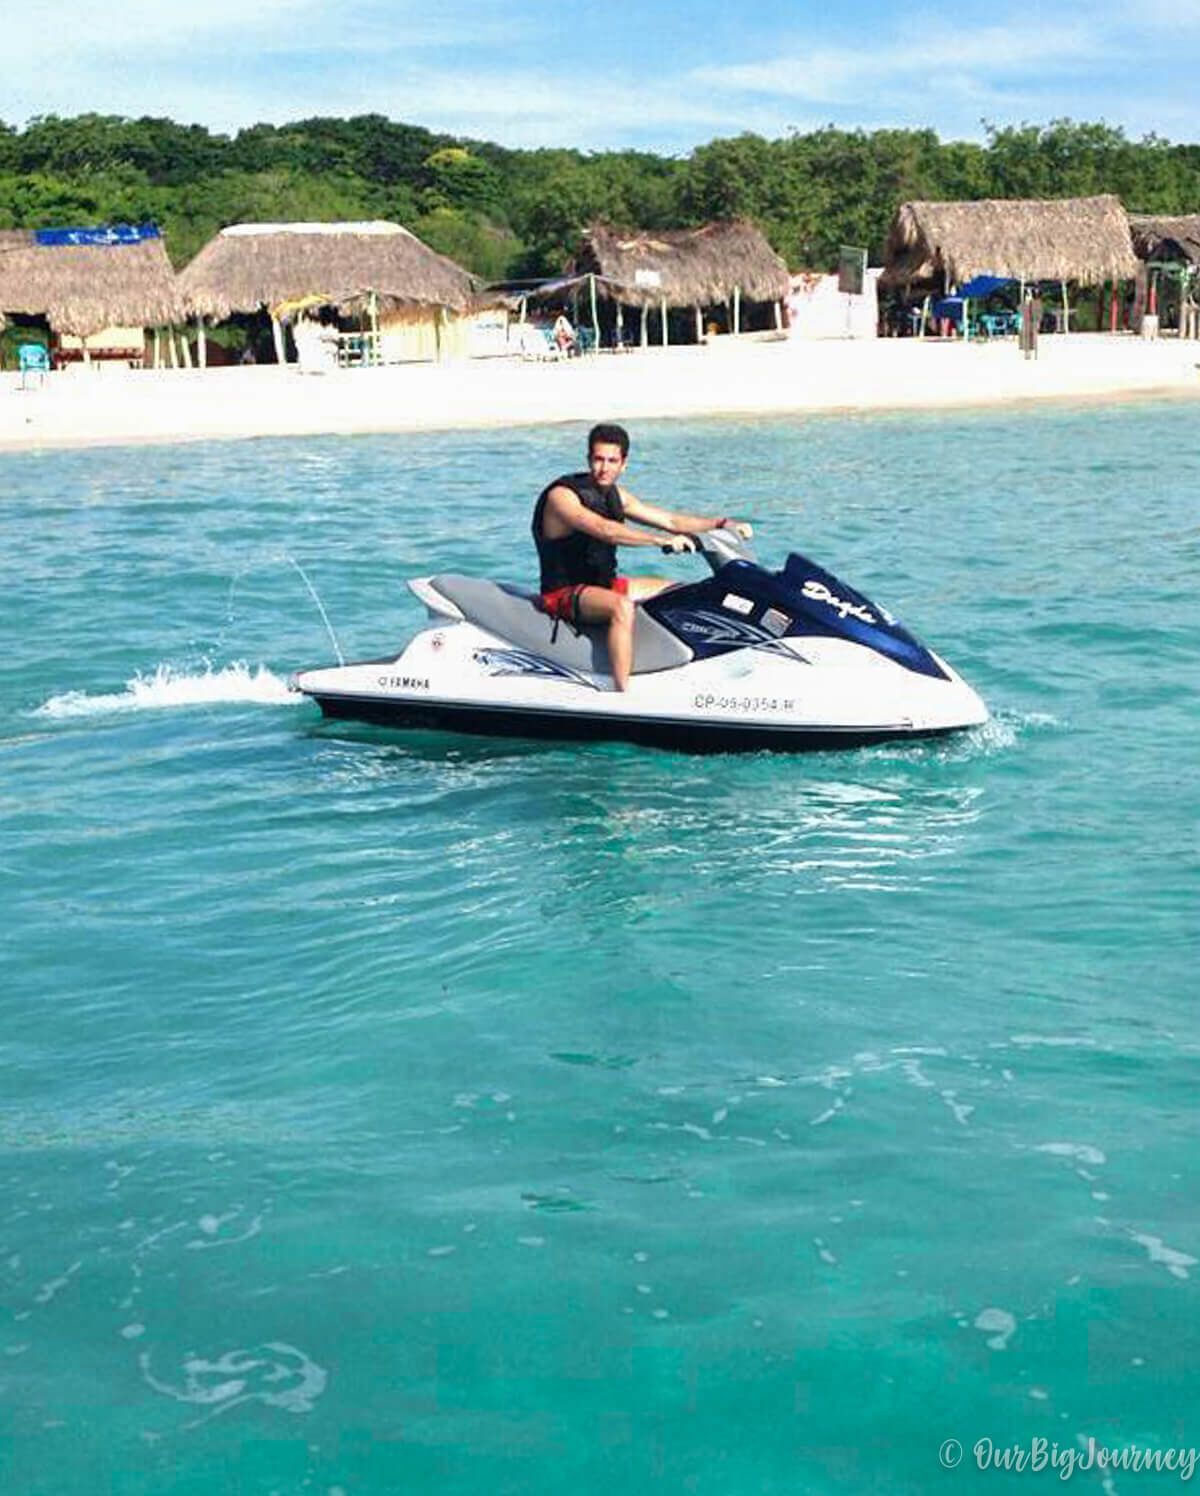 jetsky in playablanca and Cholon is a must